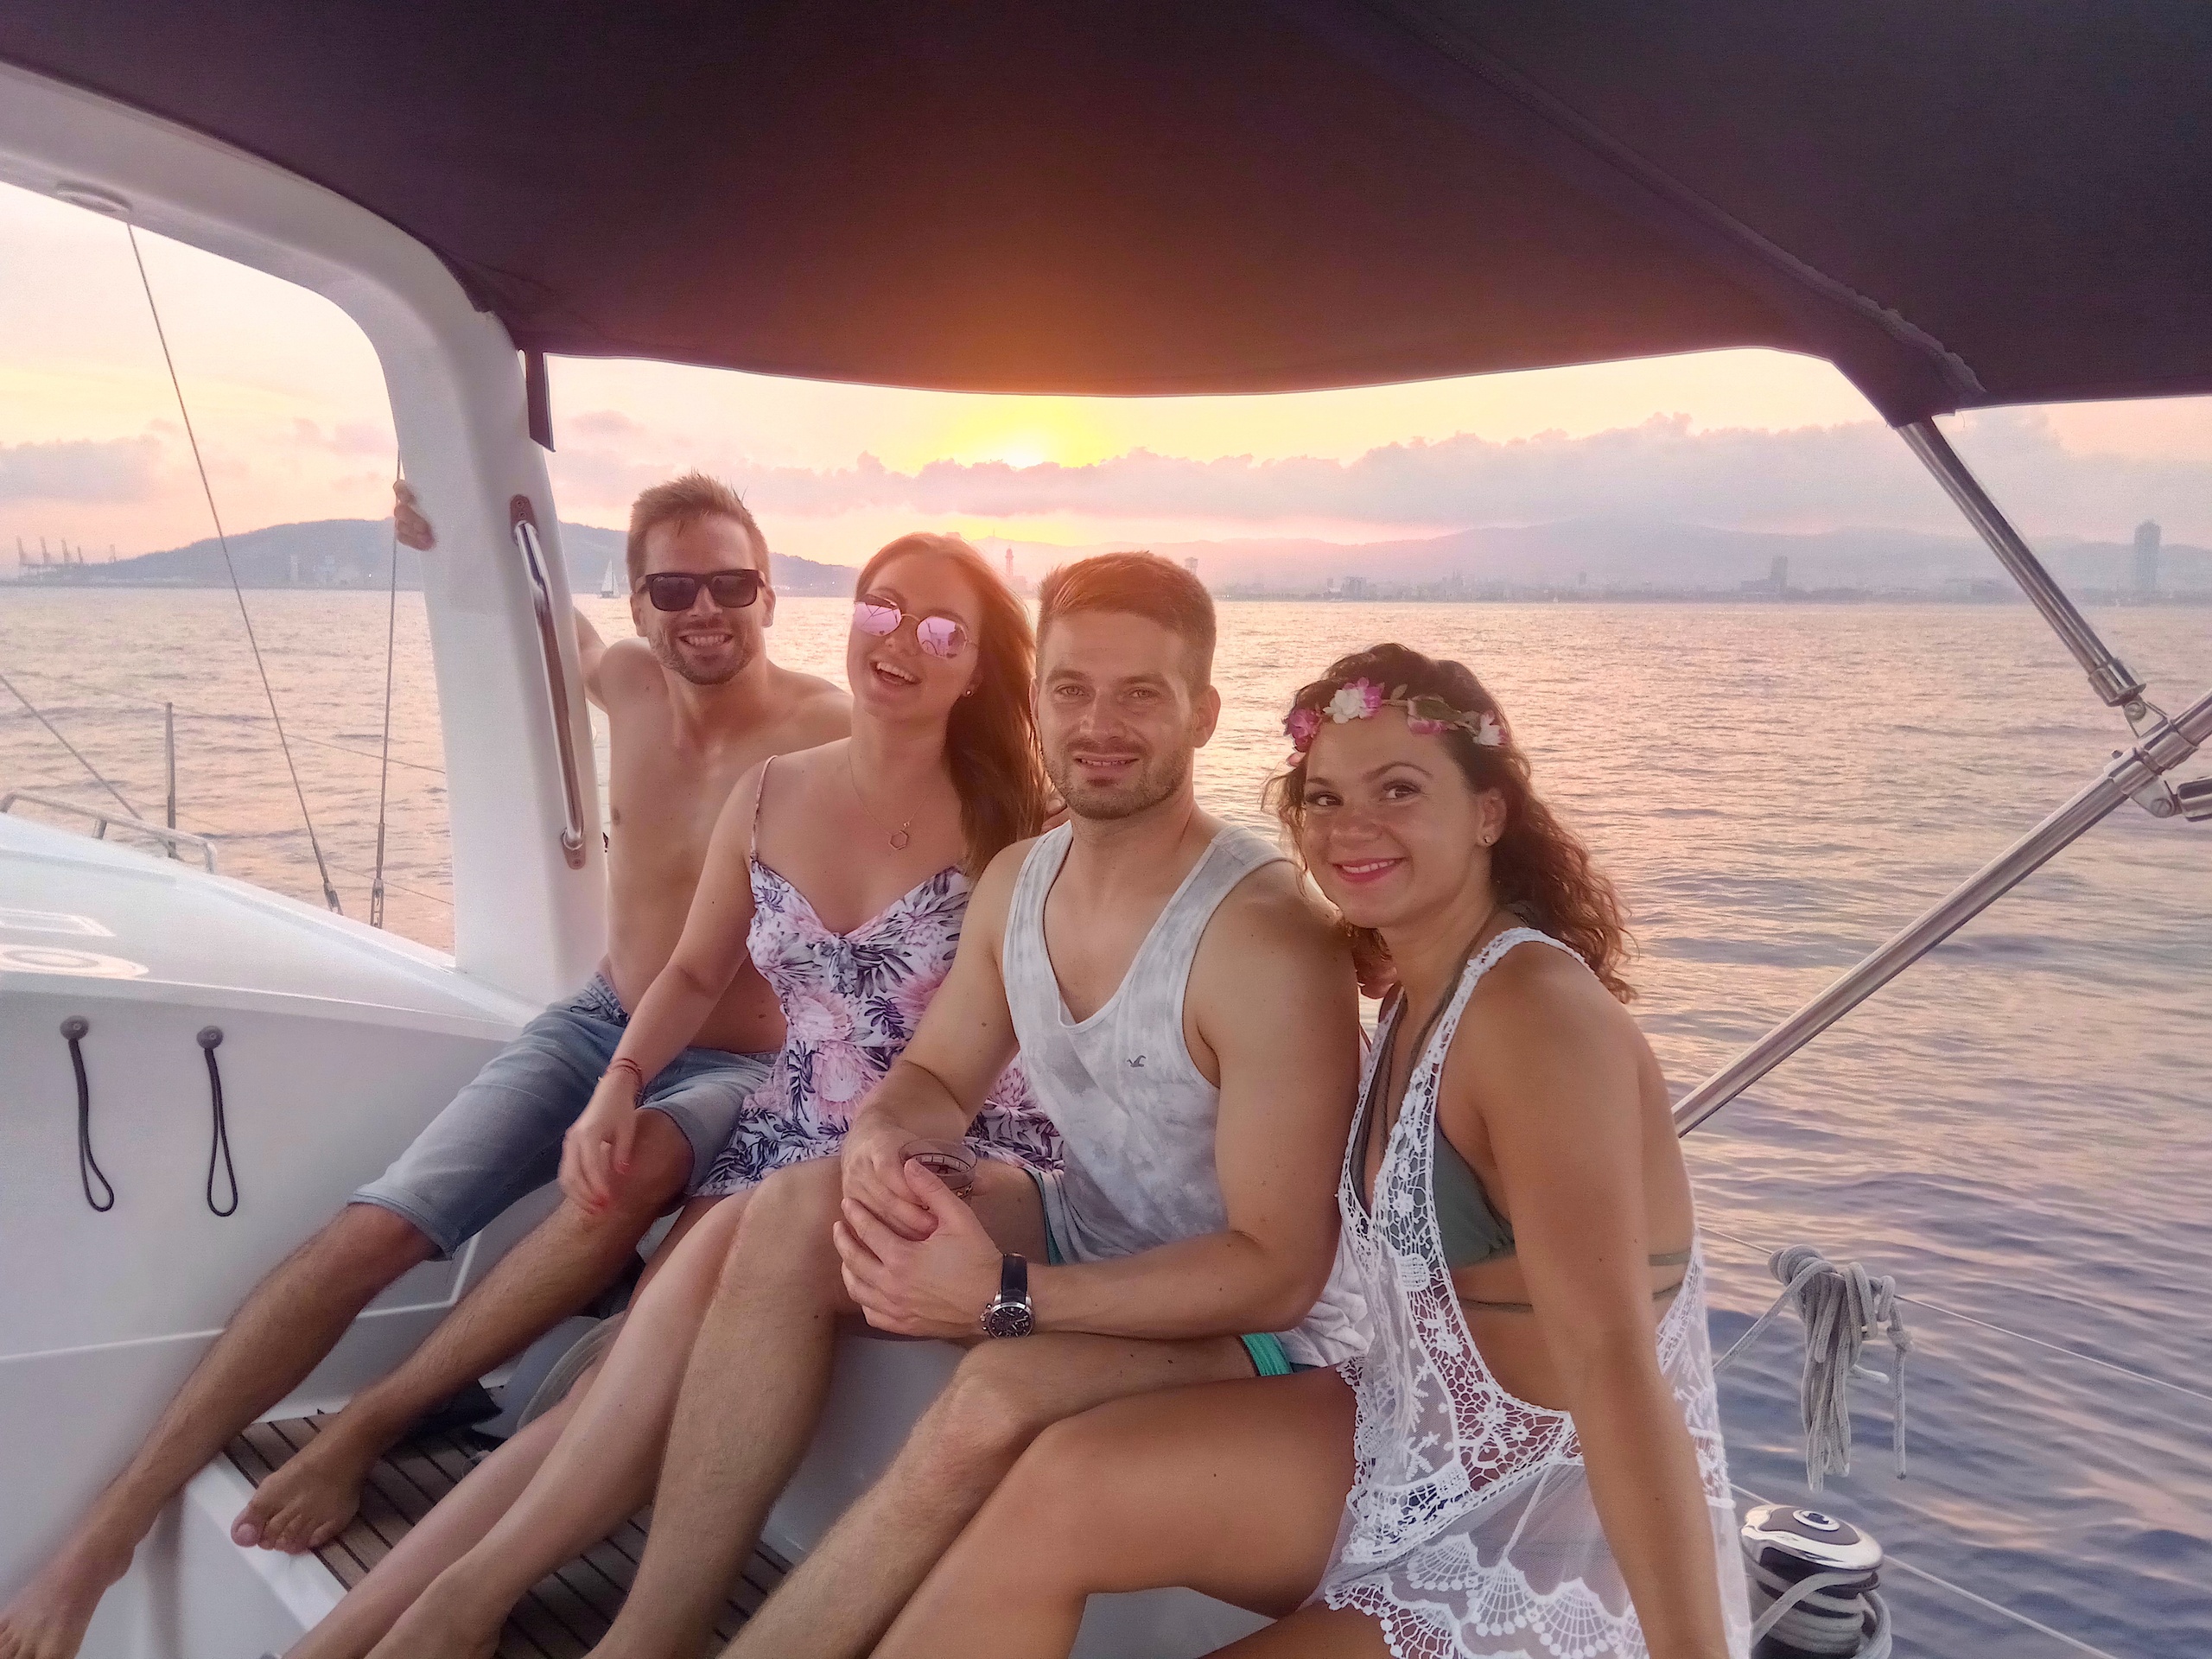 Sunset Tour on a Boat in Barcelona